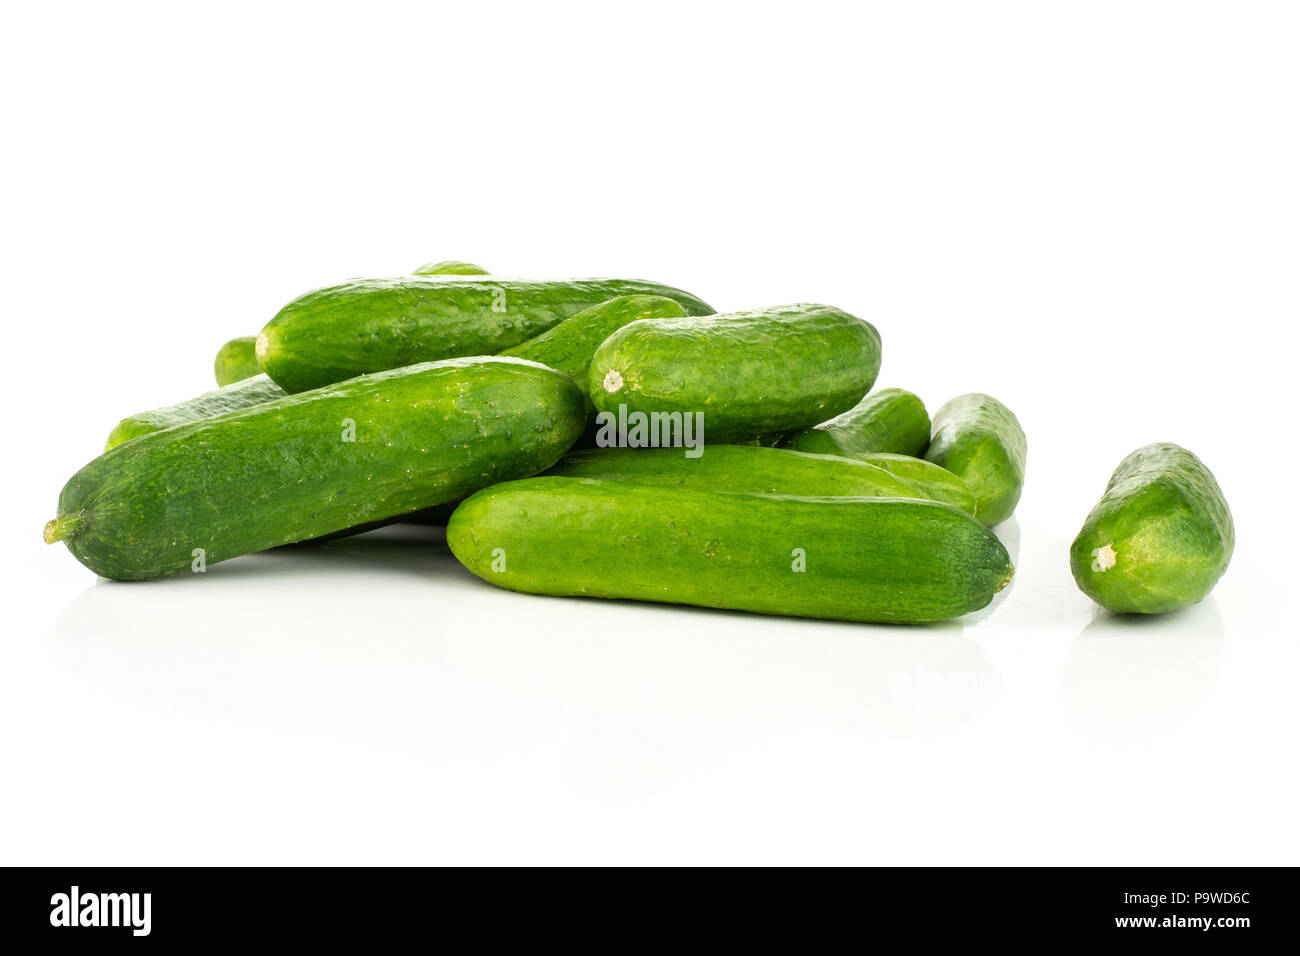 Mini cucumbers are a sweet, crisp, and fresh addition to any meal